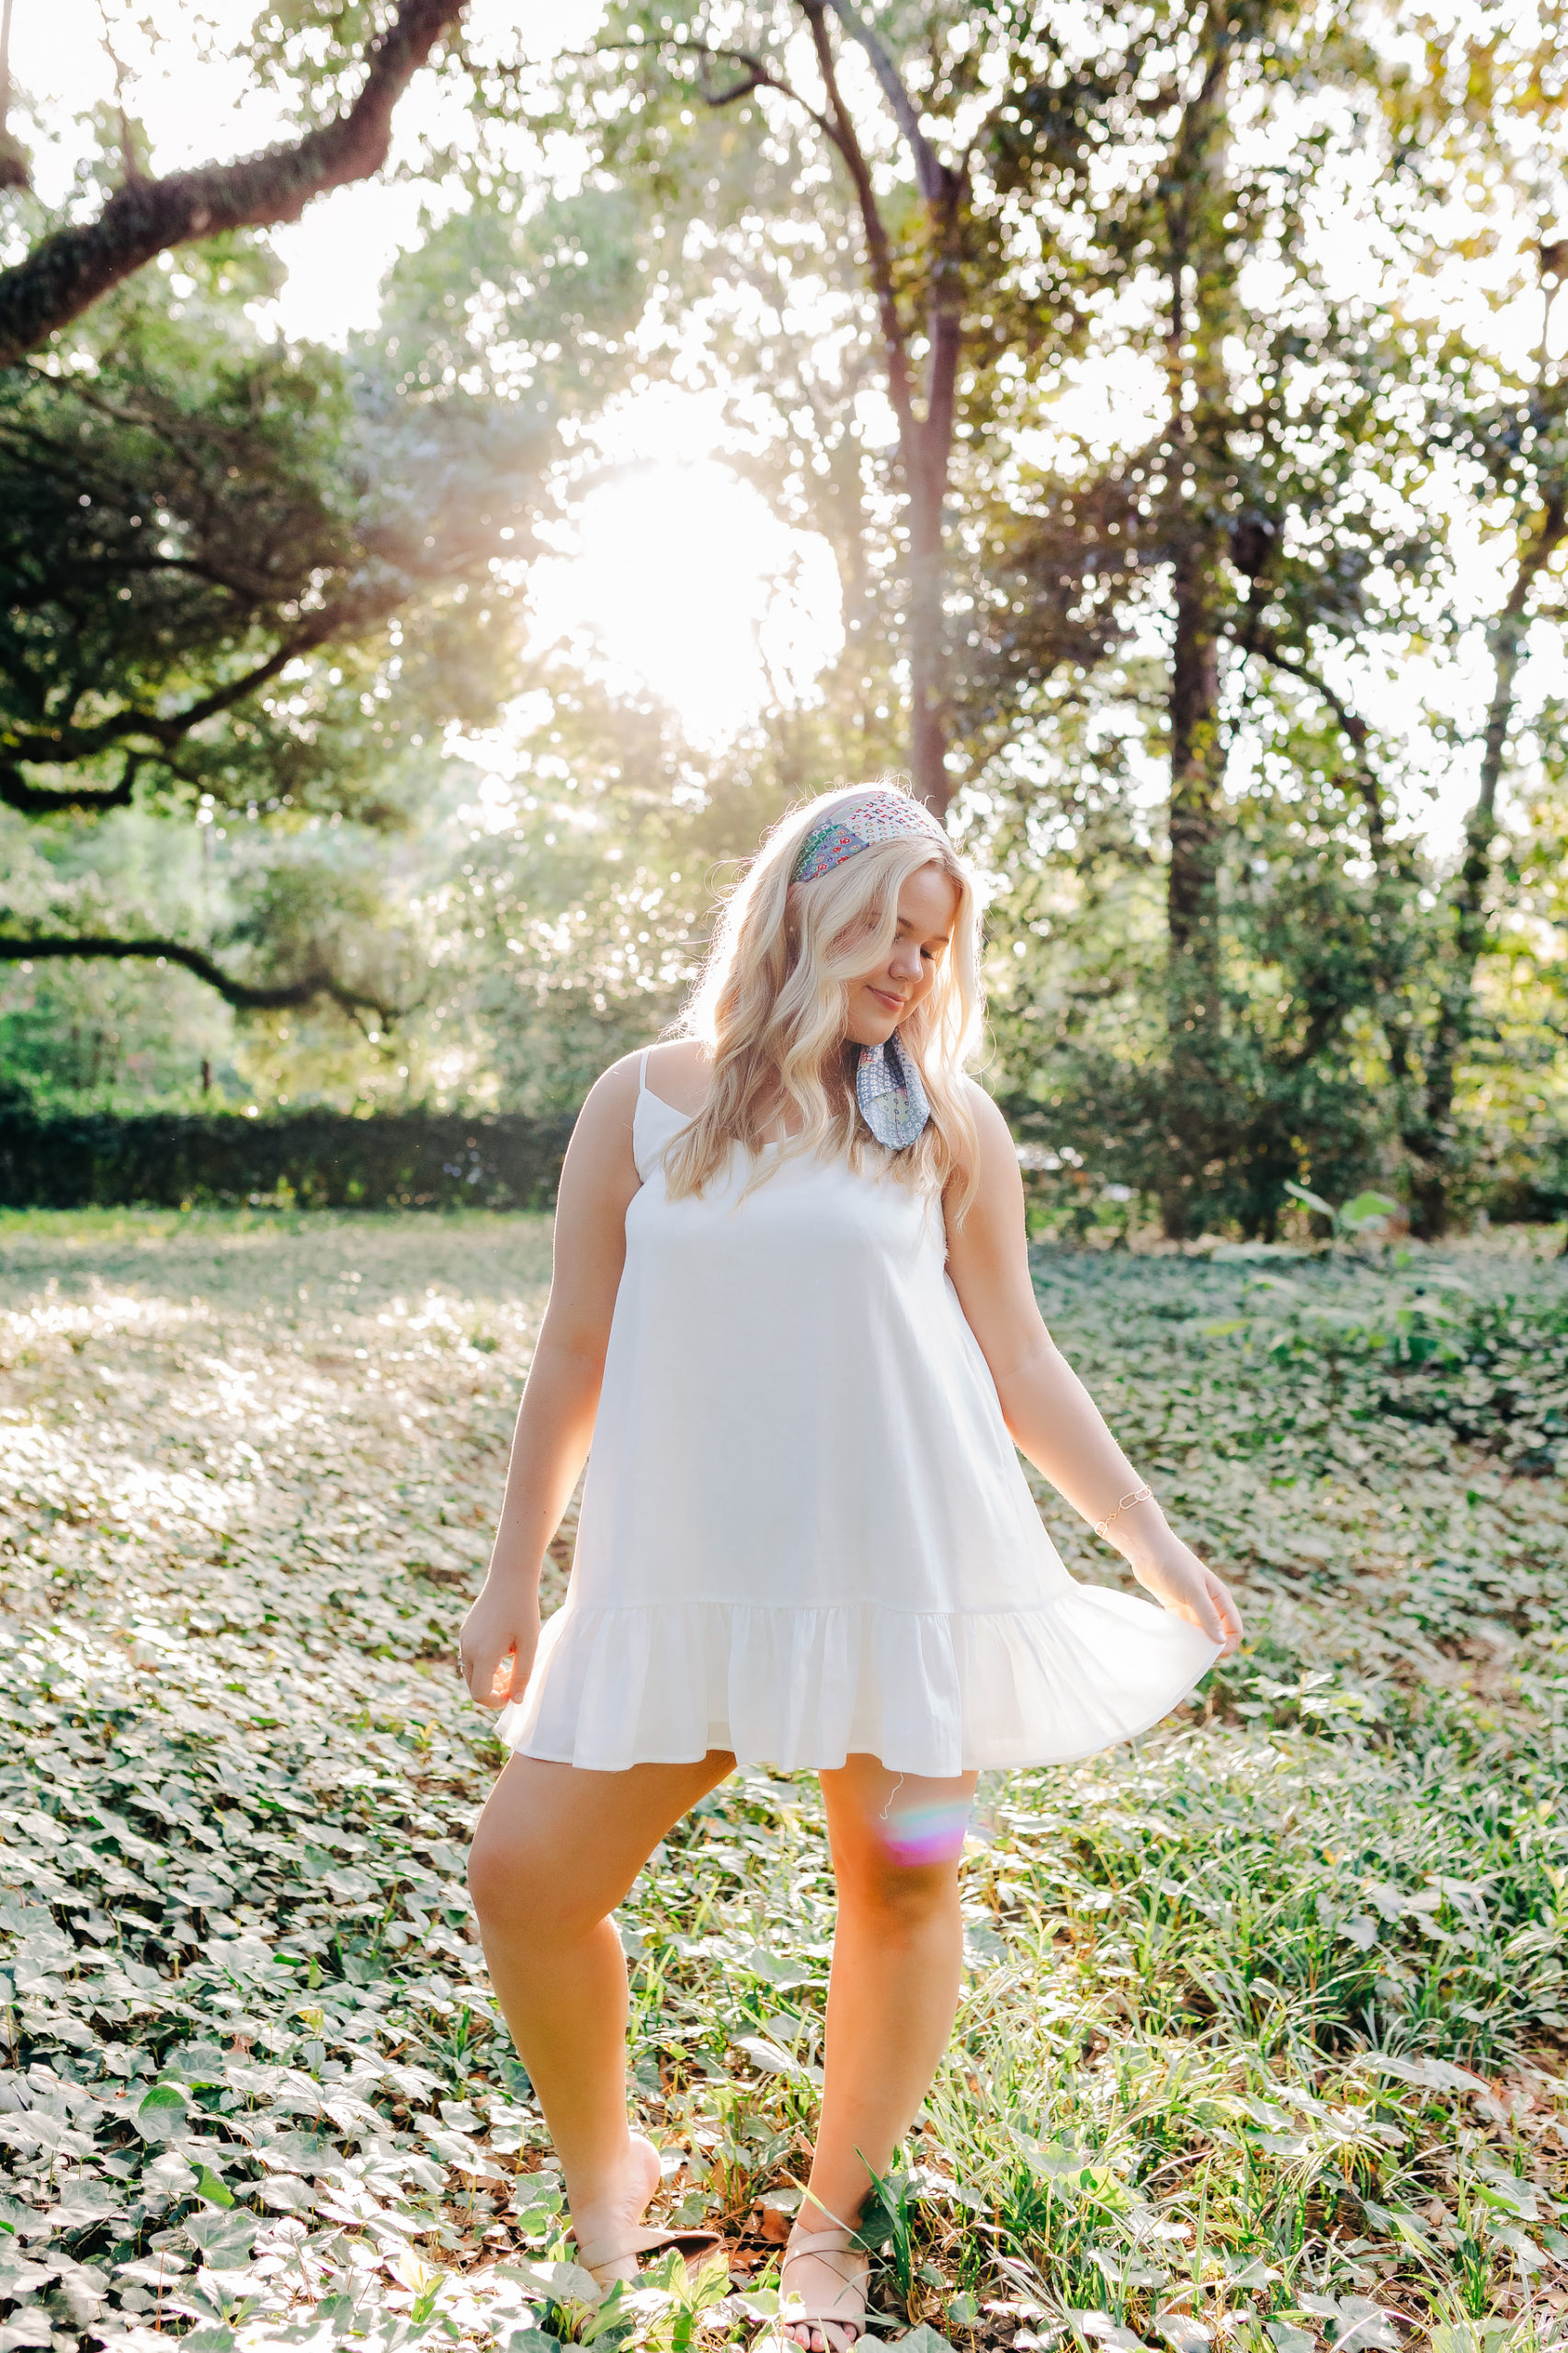 senior pictures with girl dancing in a white dress in a garden captured by aiken photographer